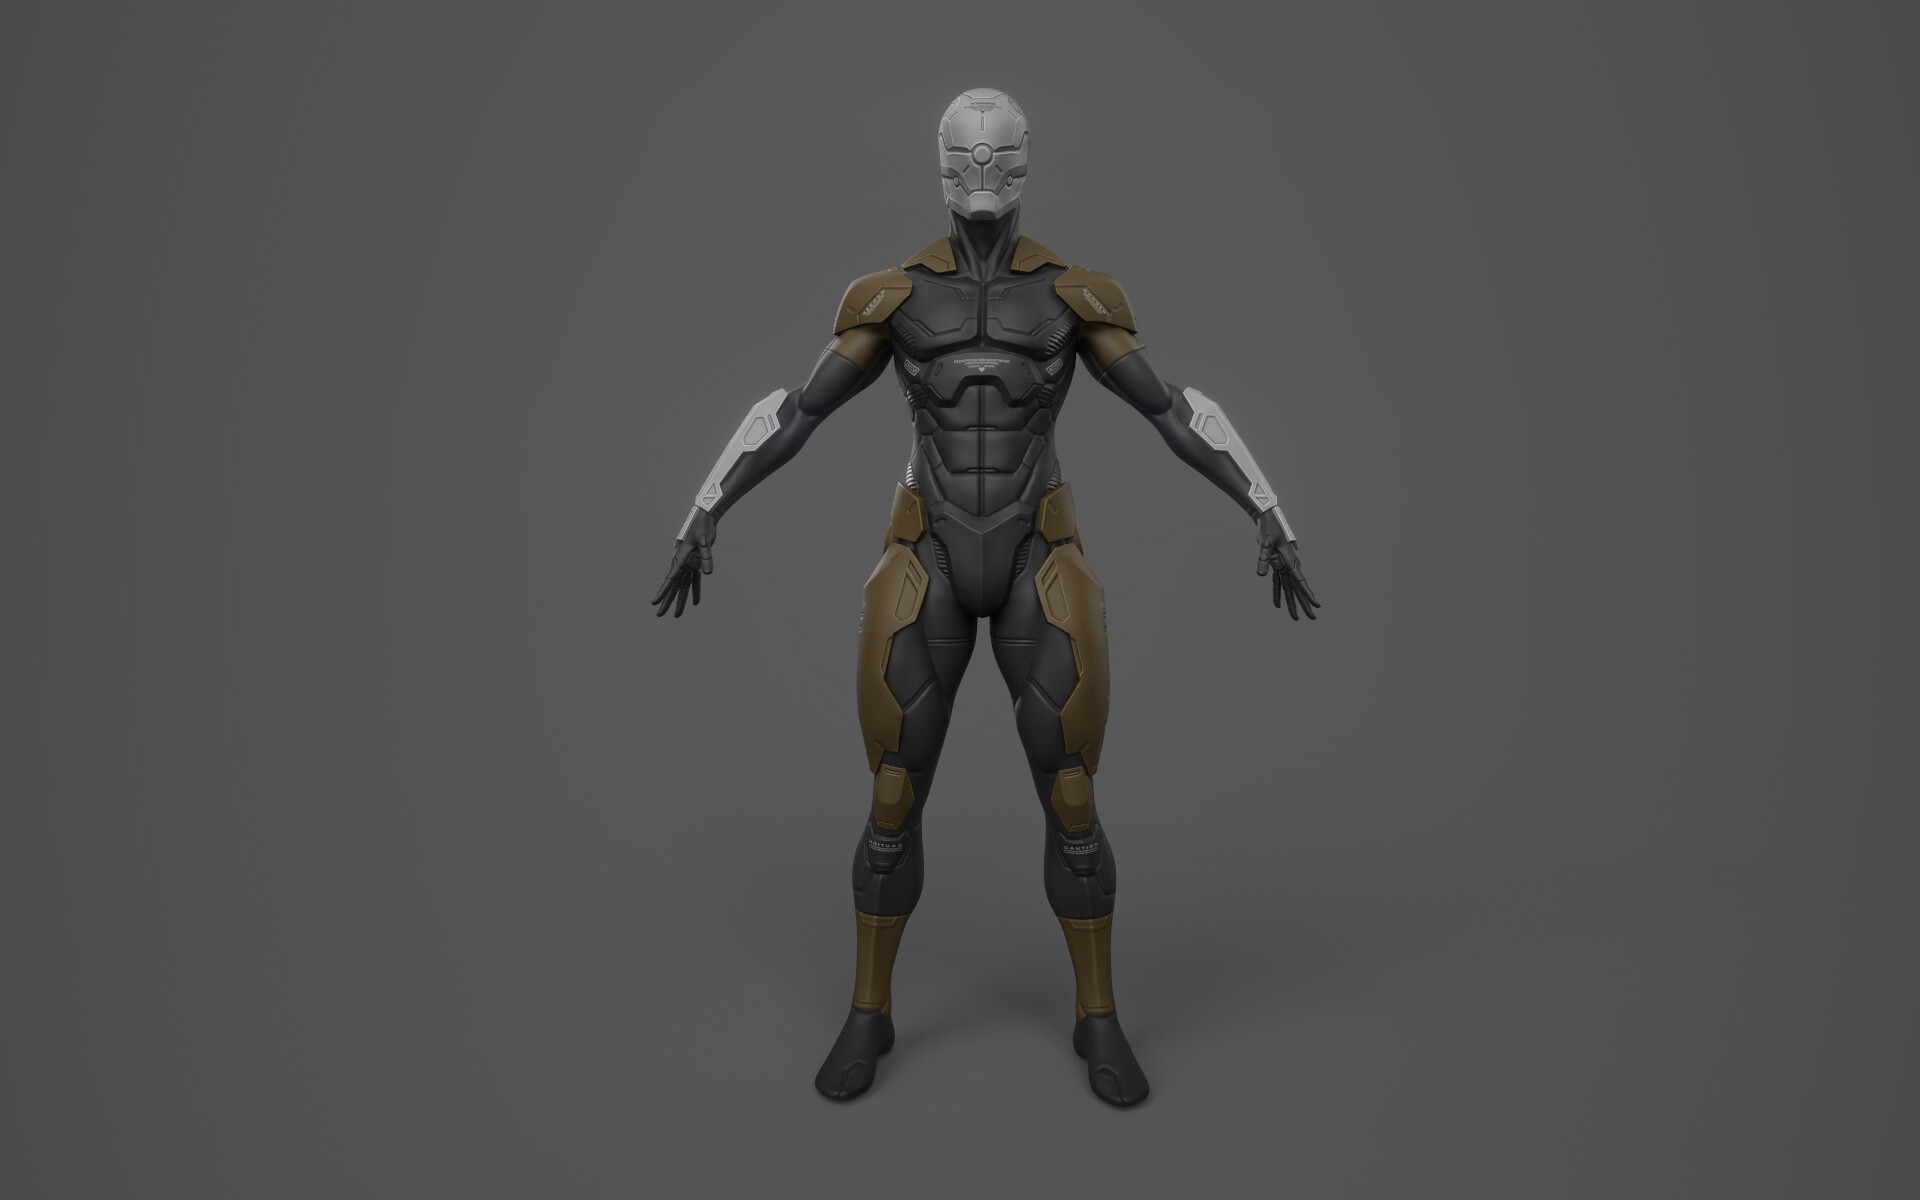 Gray fox's metal gear design with some customization. 